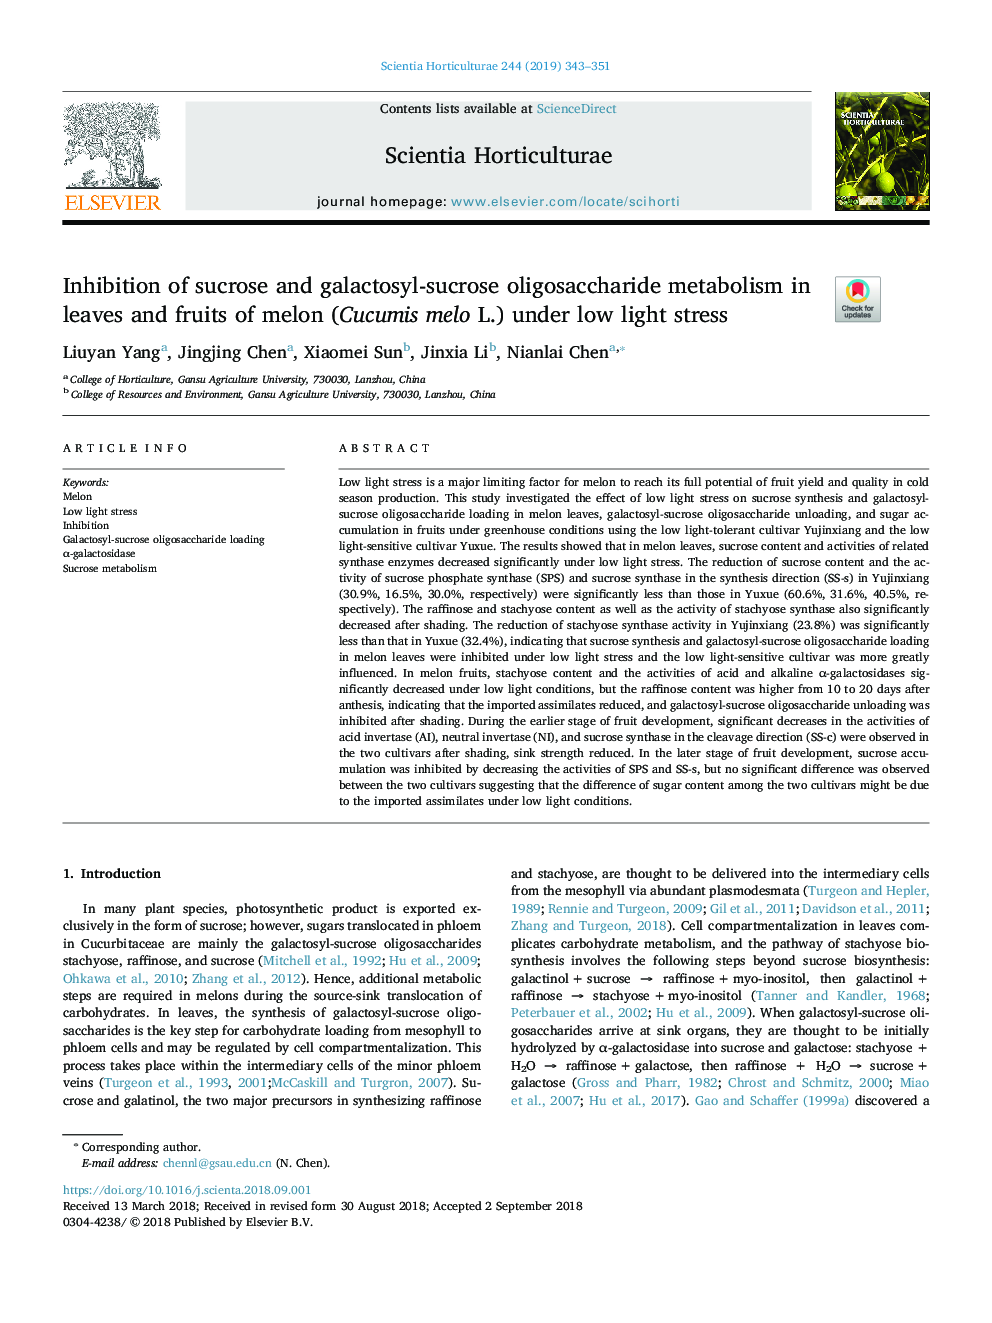 Inhibition of sucrose and galactosyl-sucrose oligosaccharide metabolism in leaves and fruits of melon (Cucumis melo L.) under low light stress